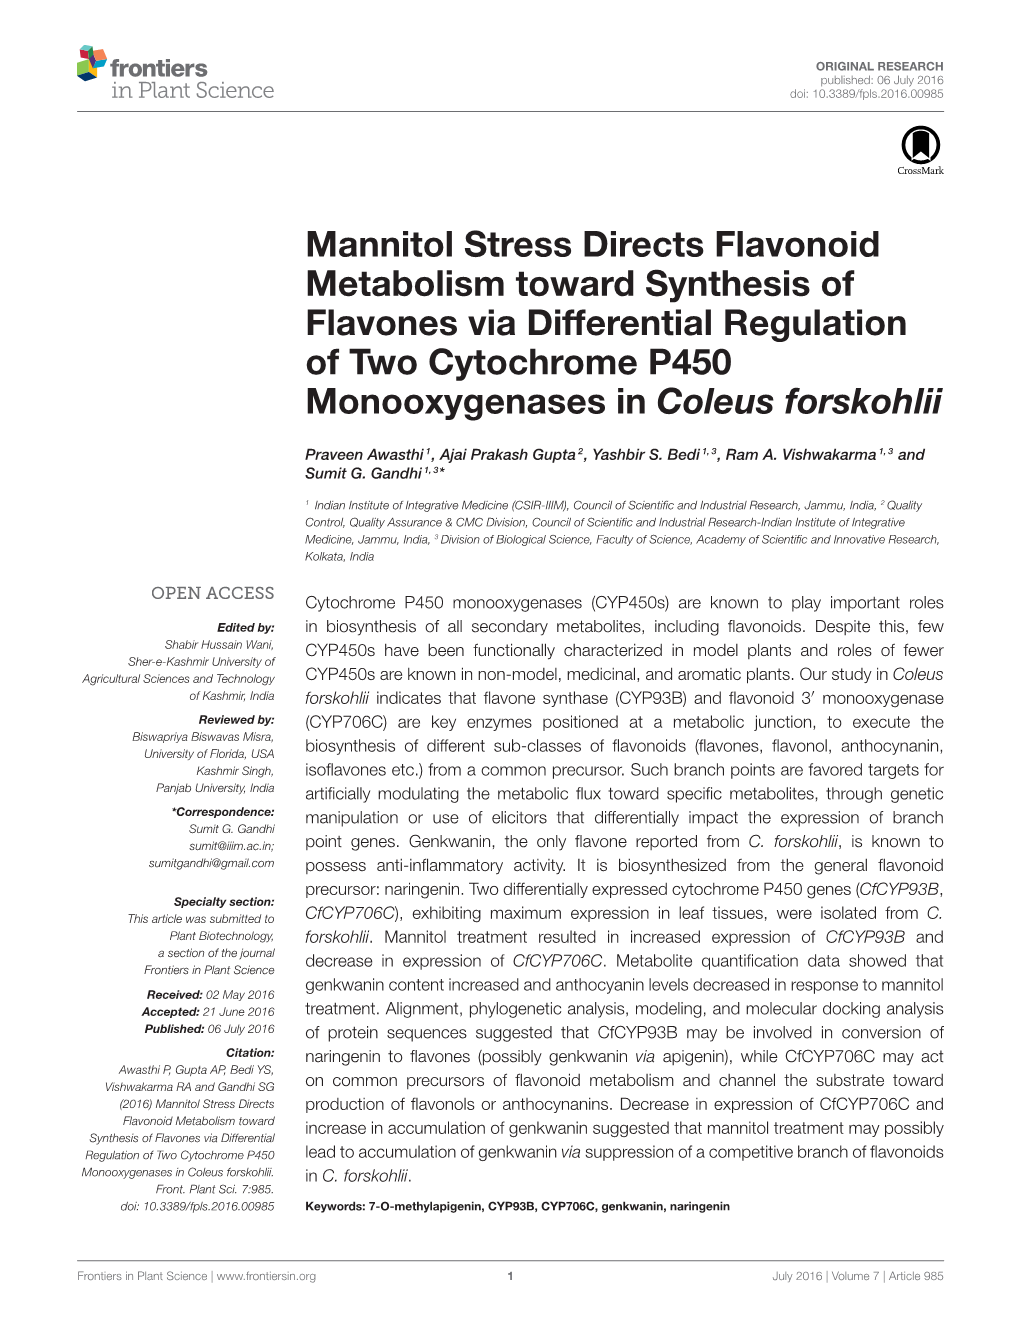 Mannitol Stress Directs Flavonoid Metabolism Toward Synthesis of Flavones Via Differential Regulation of Two Cytochrome P450 Monooxygenases in Coleus Forskohlii